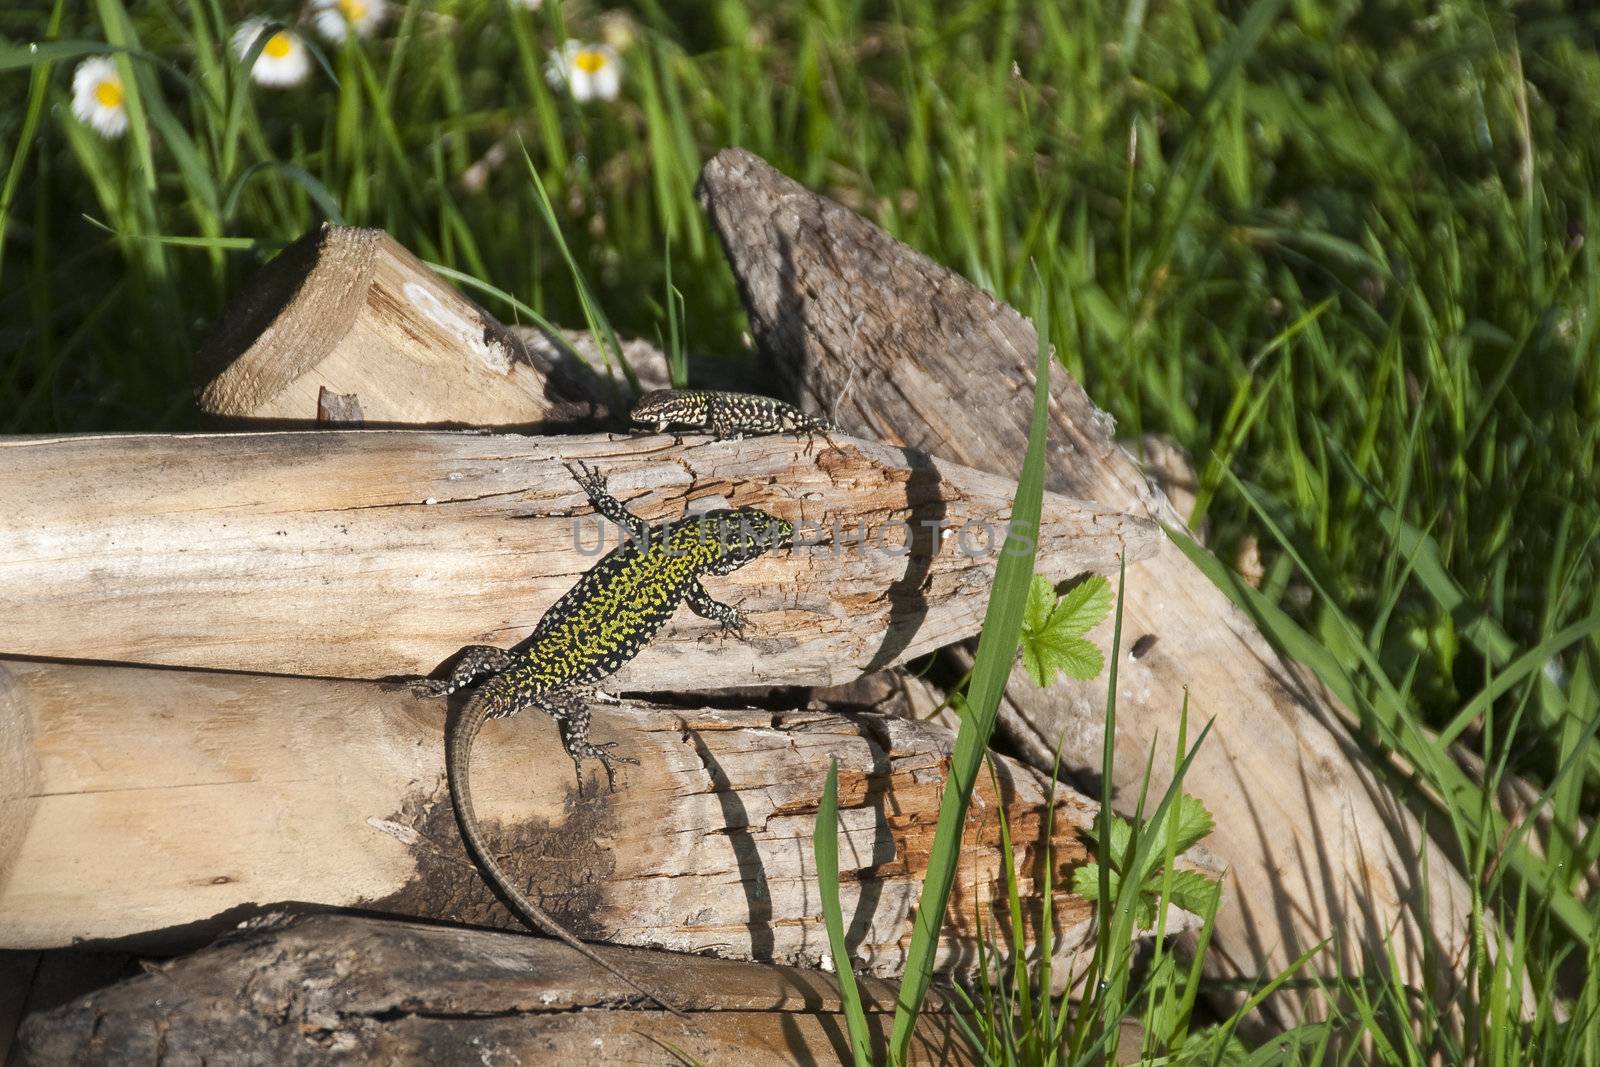 Encounter of two Lizards in a Tuscan Garden